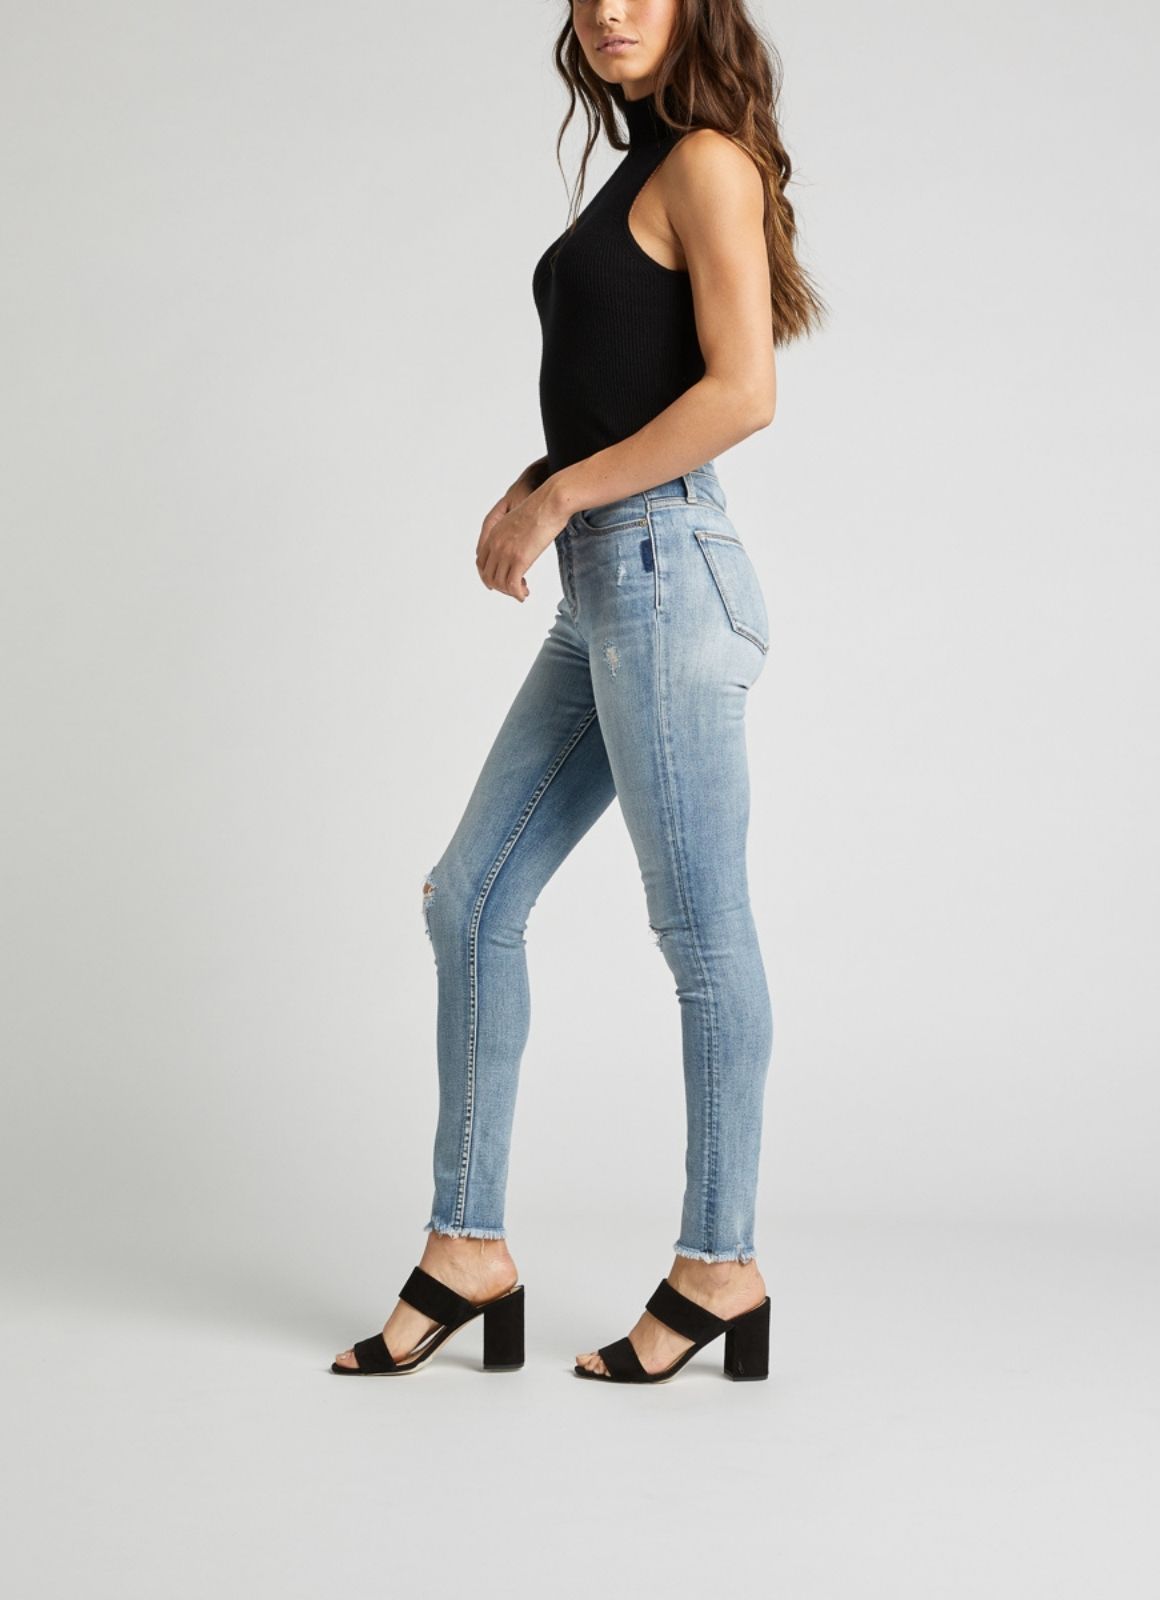 Silver Jeans - High Note High Rise Skinny Leg